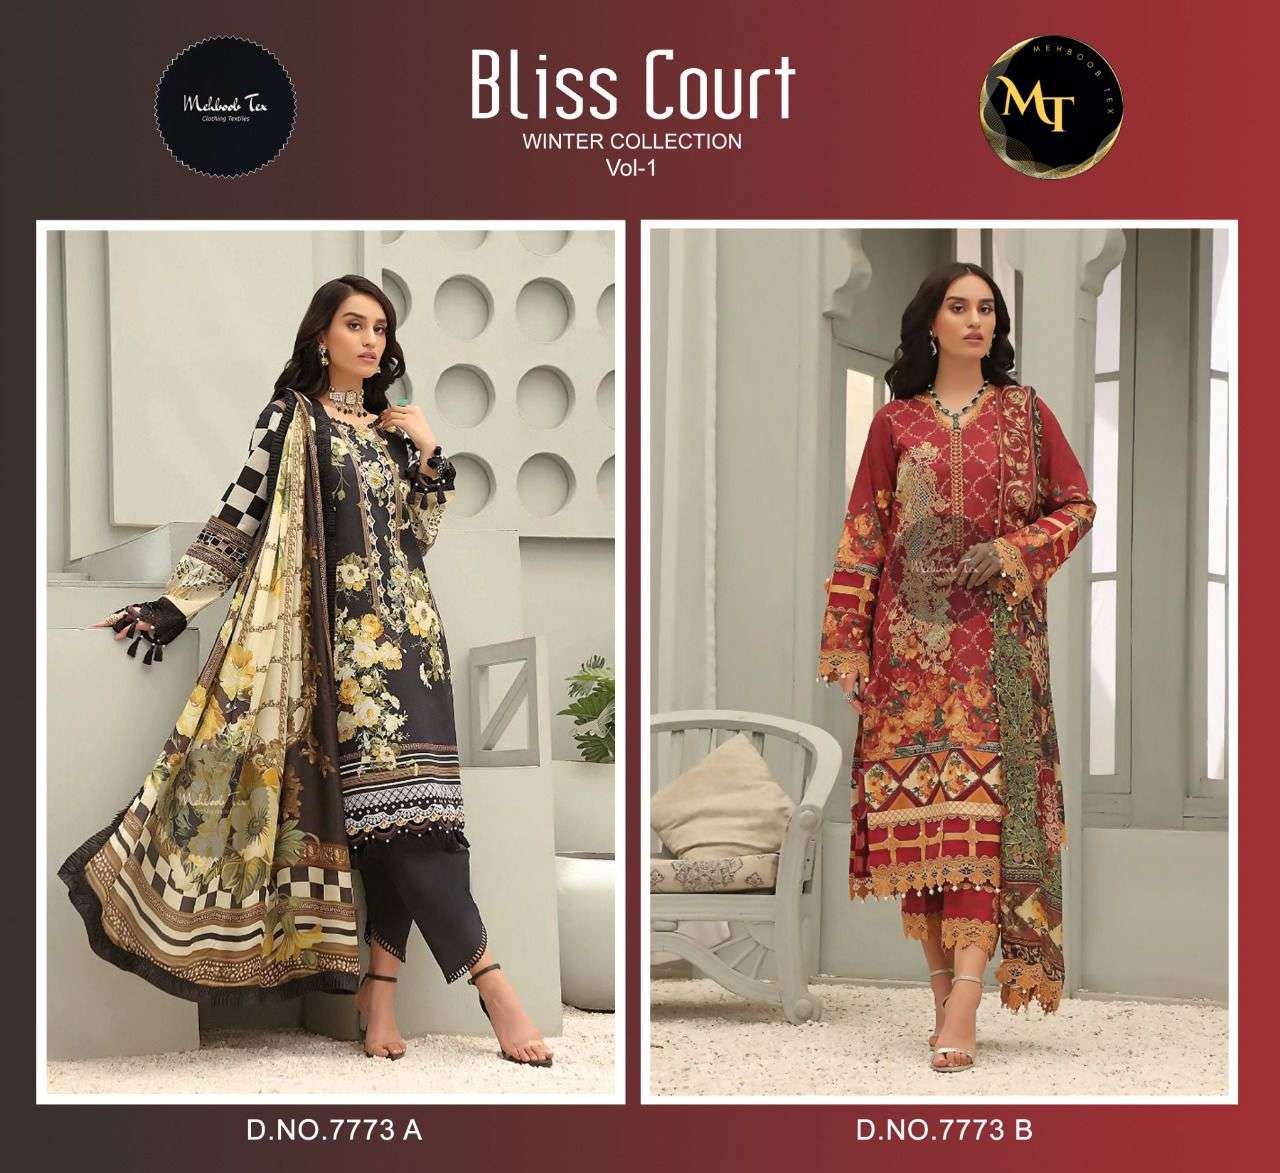 MEHBOOB TEX BLISS COURT WINTER COLLECTION VOL 1